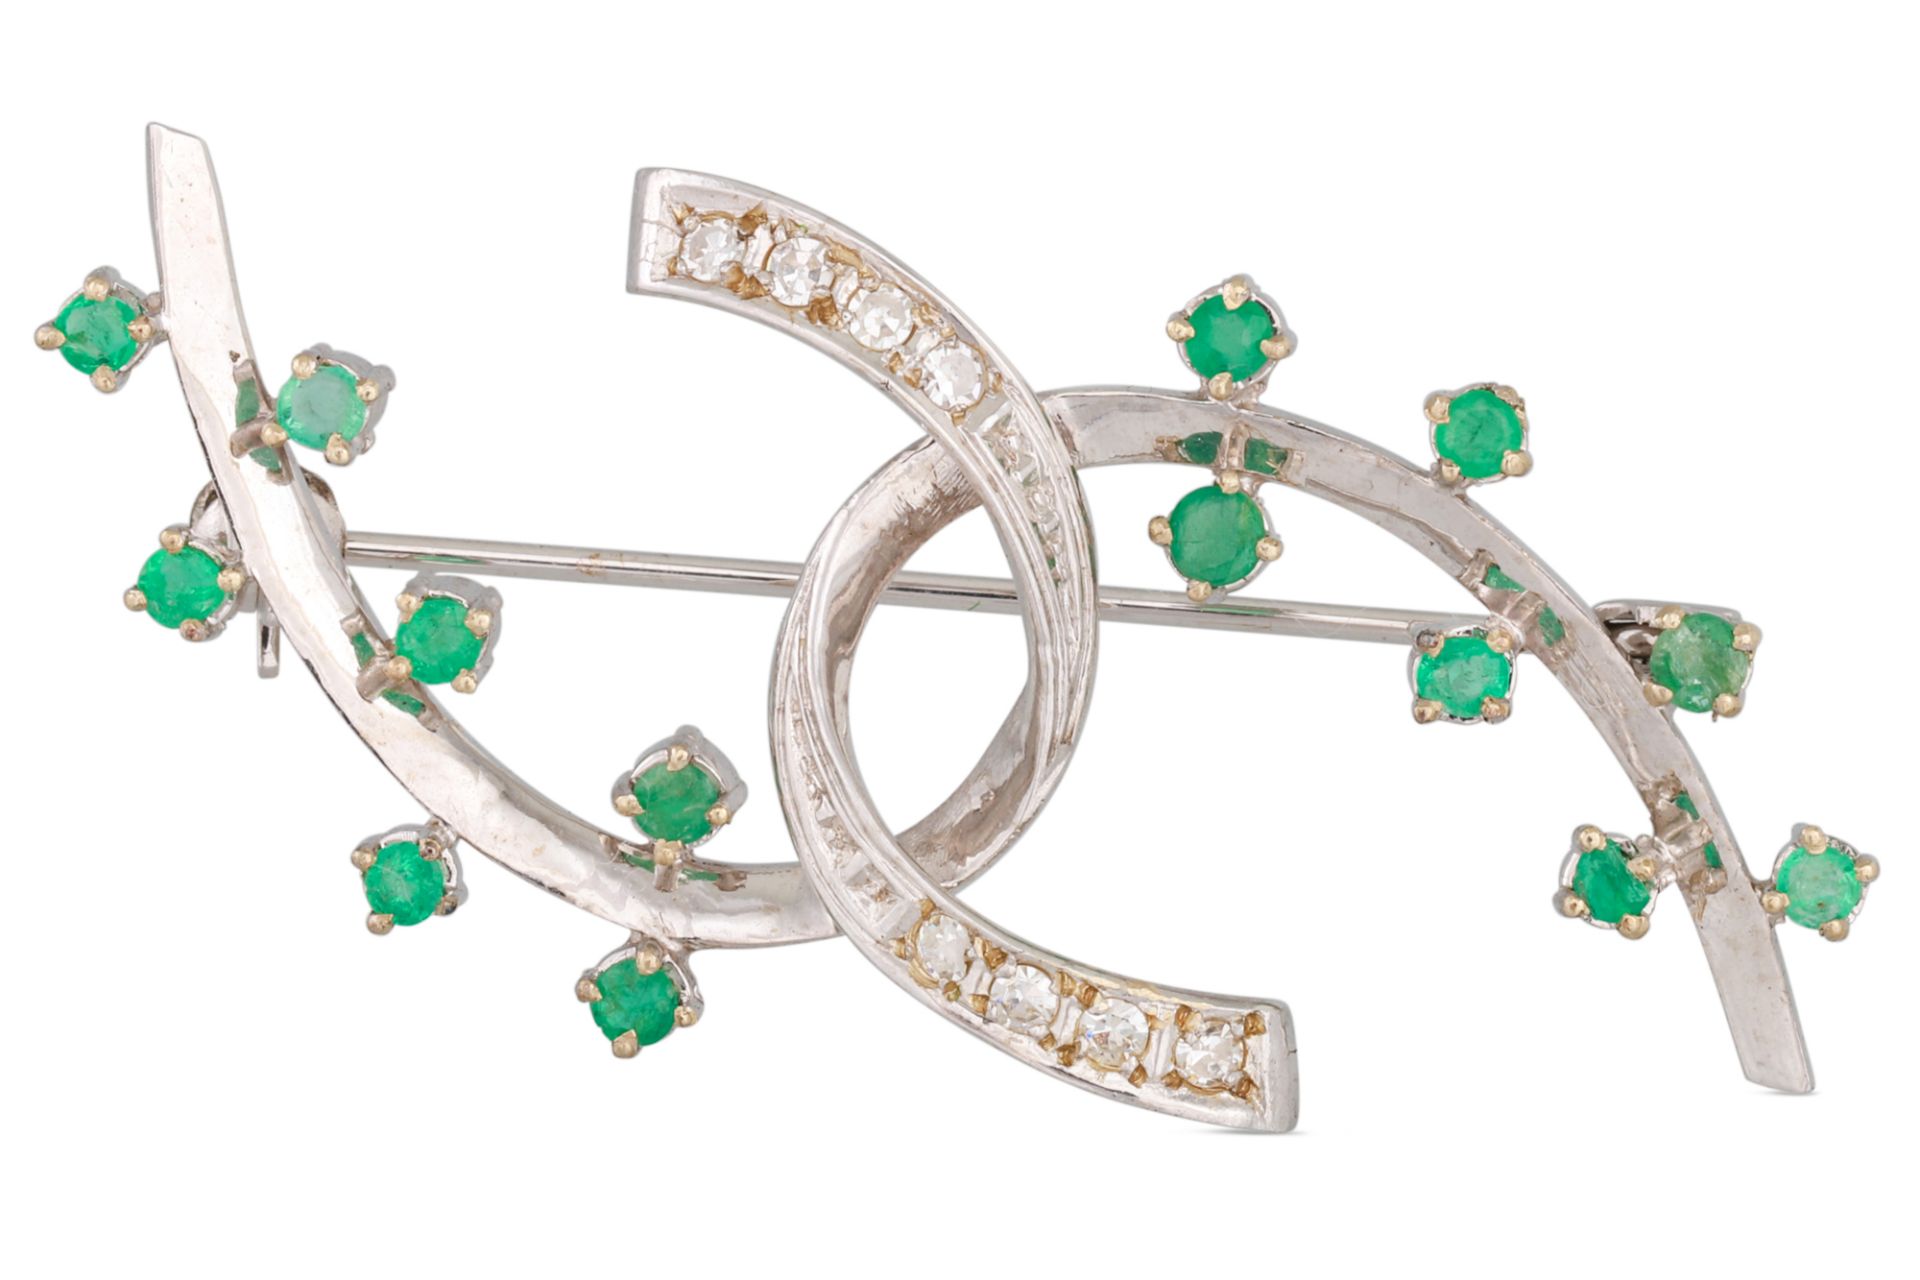 A DIAMOND AND EMERALD BROOCH, intertwined abstract form, mounted in 18ct white gold